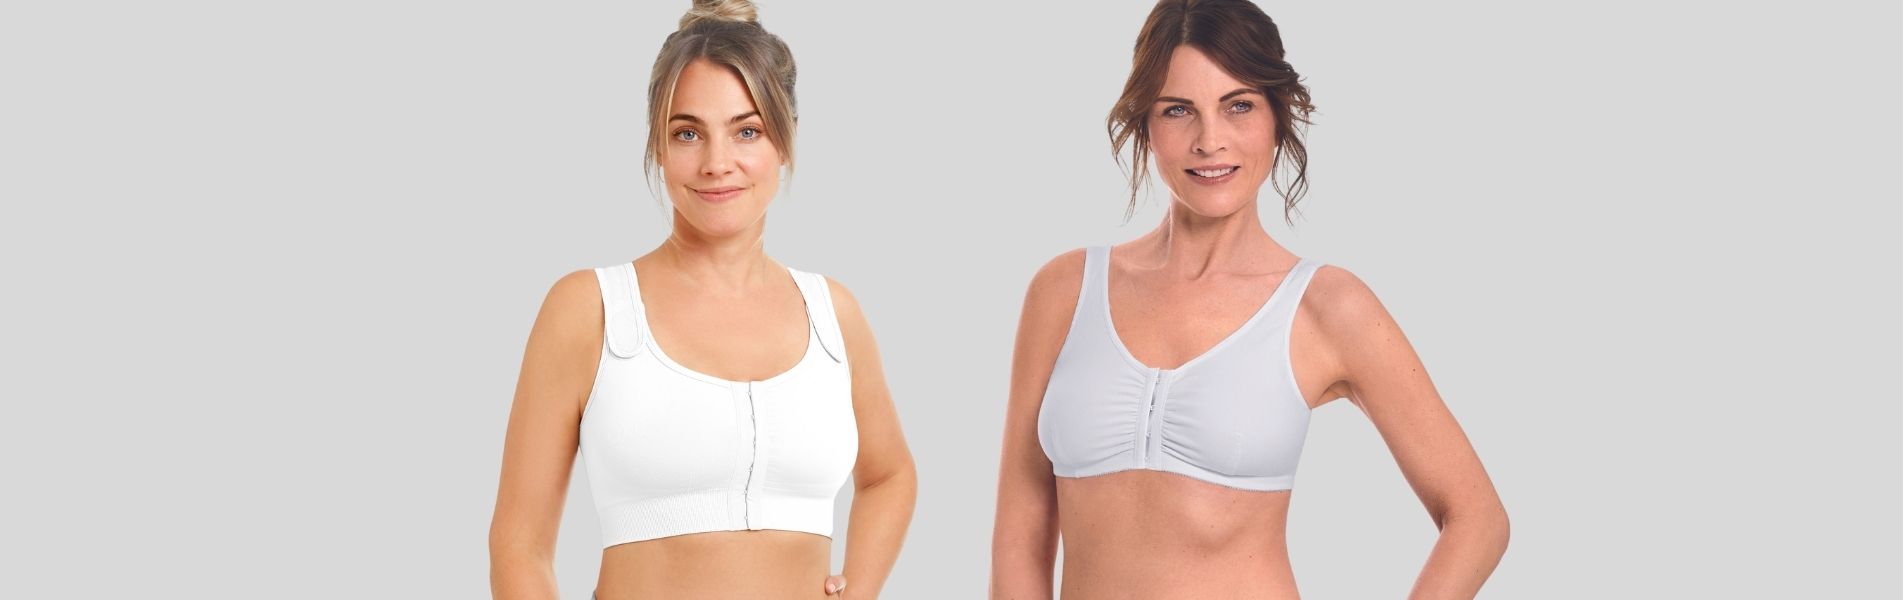 Post Surgery Bras & Recovery Wear: Middle aged female wearing surgical bra in white, front view - Desktop